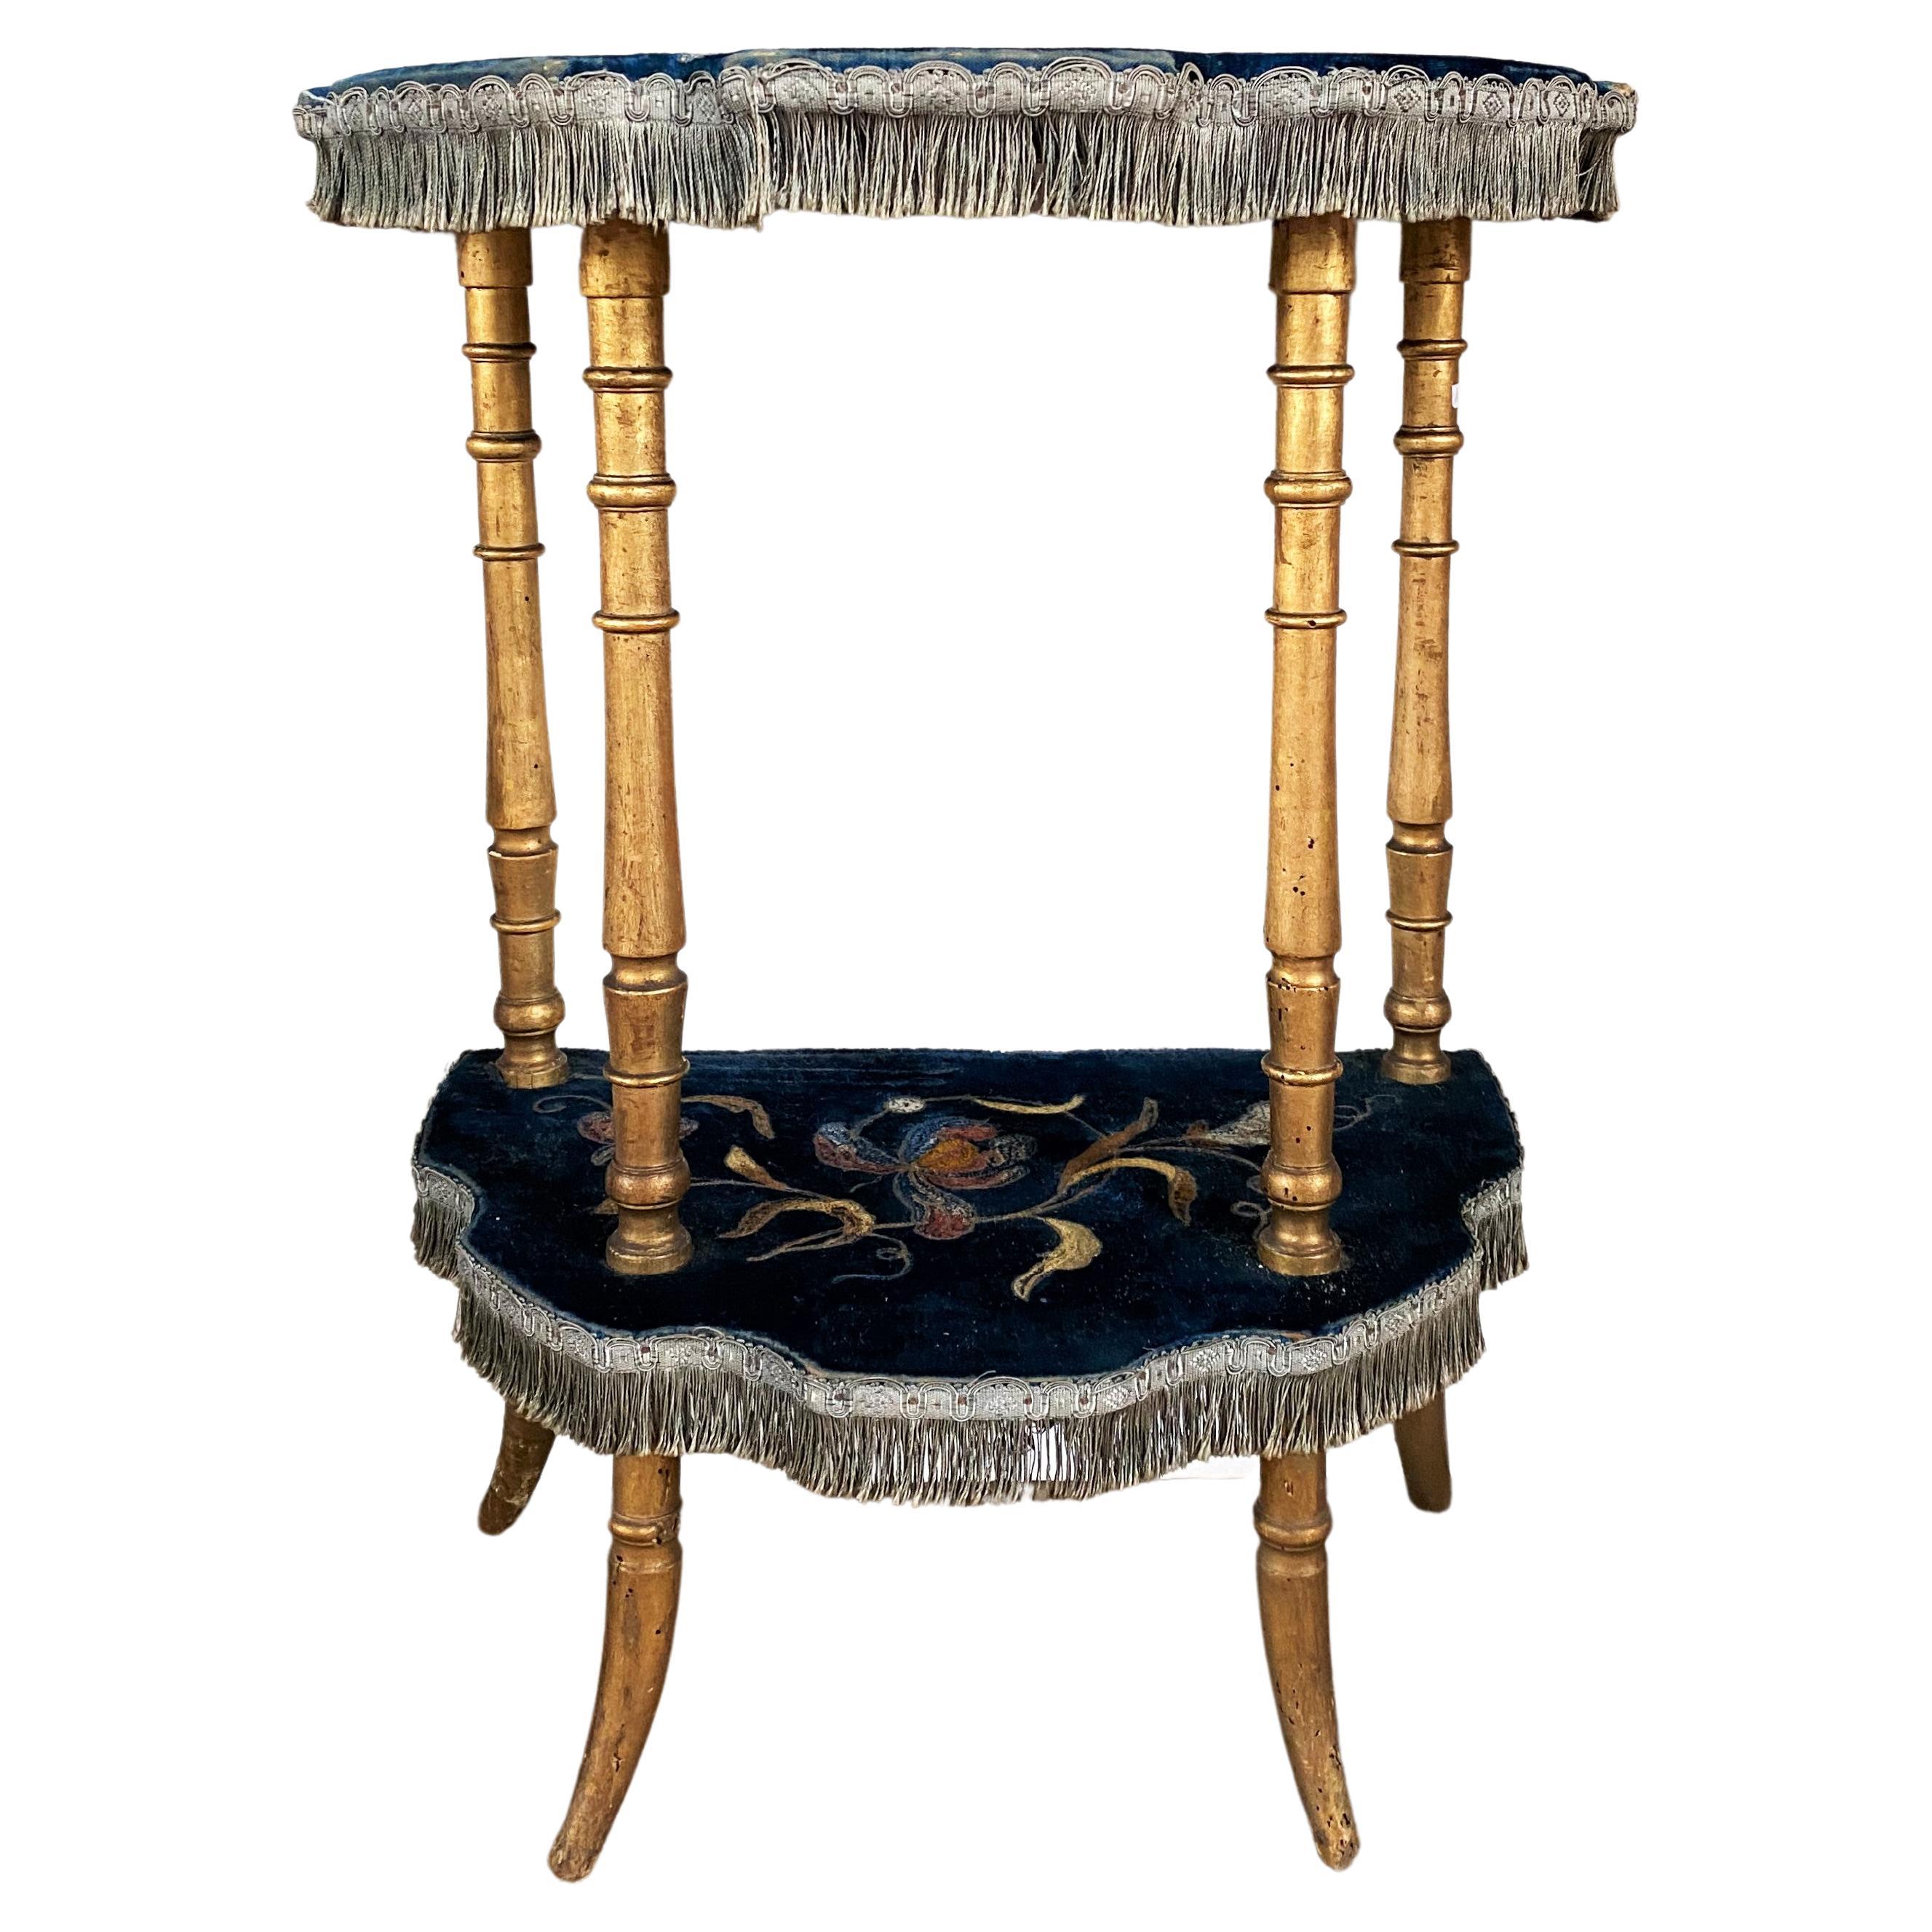 Demi-Lune Console Napoleon III Period Gilded Wood and Royal Bleu Velvet For Sale